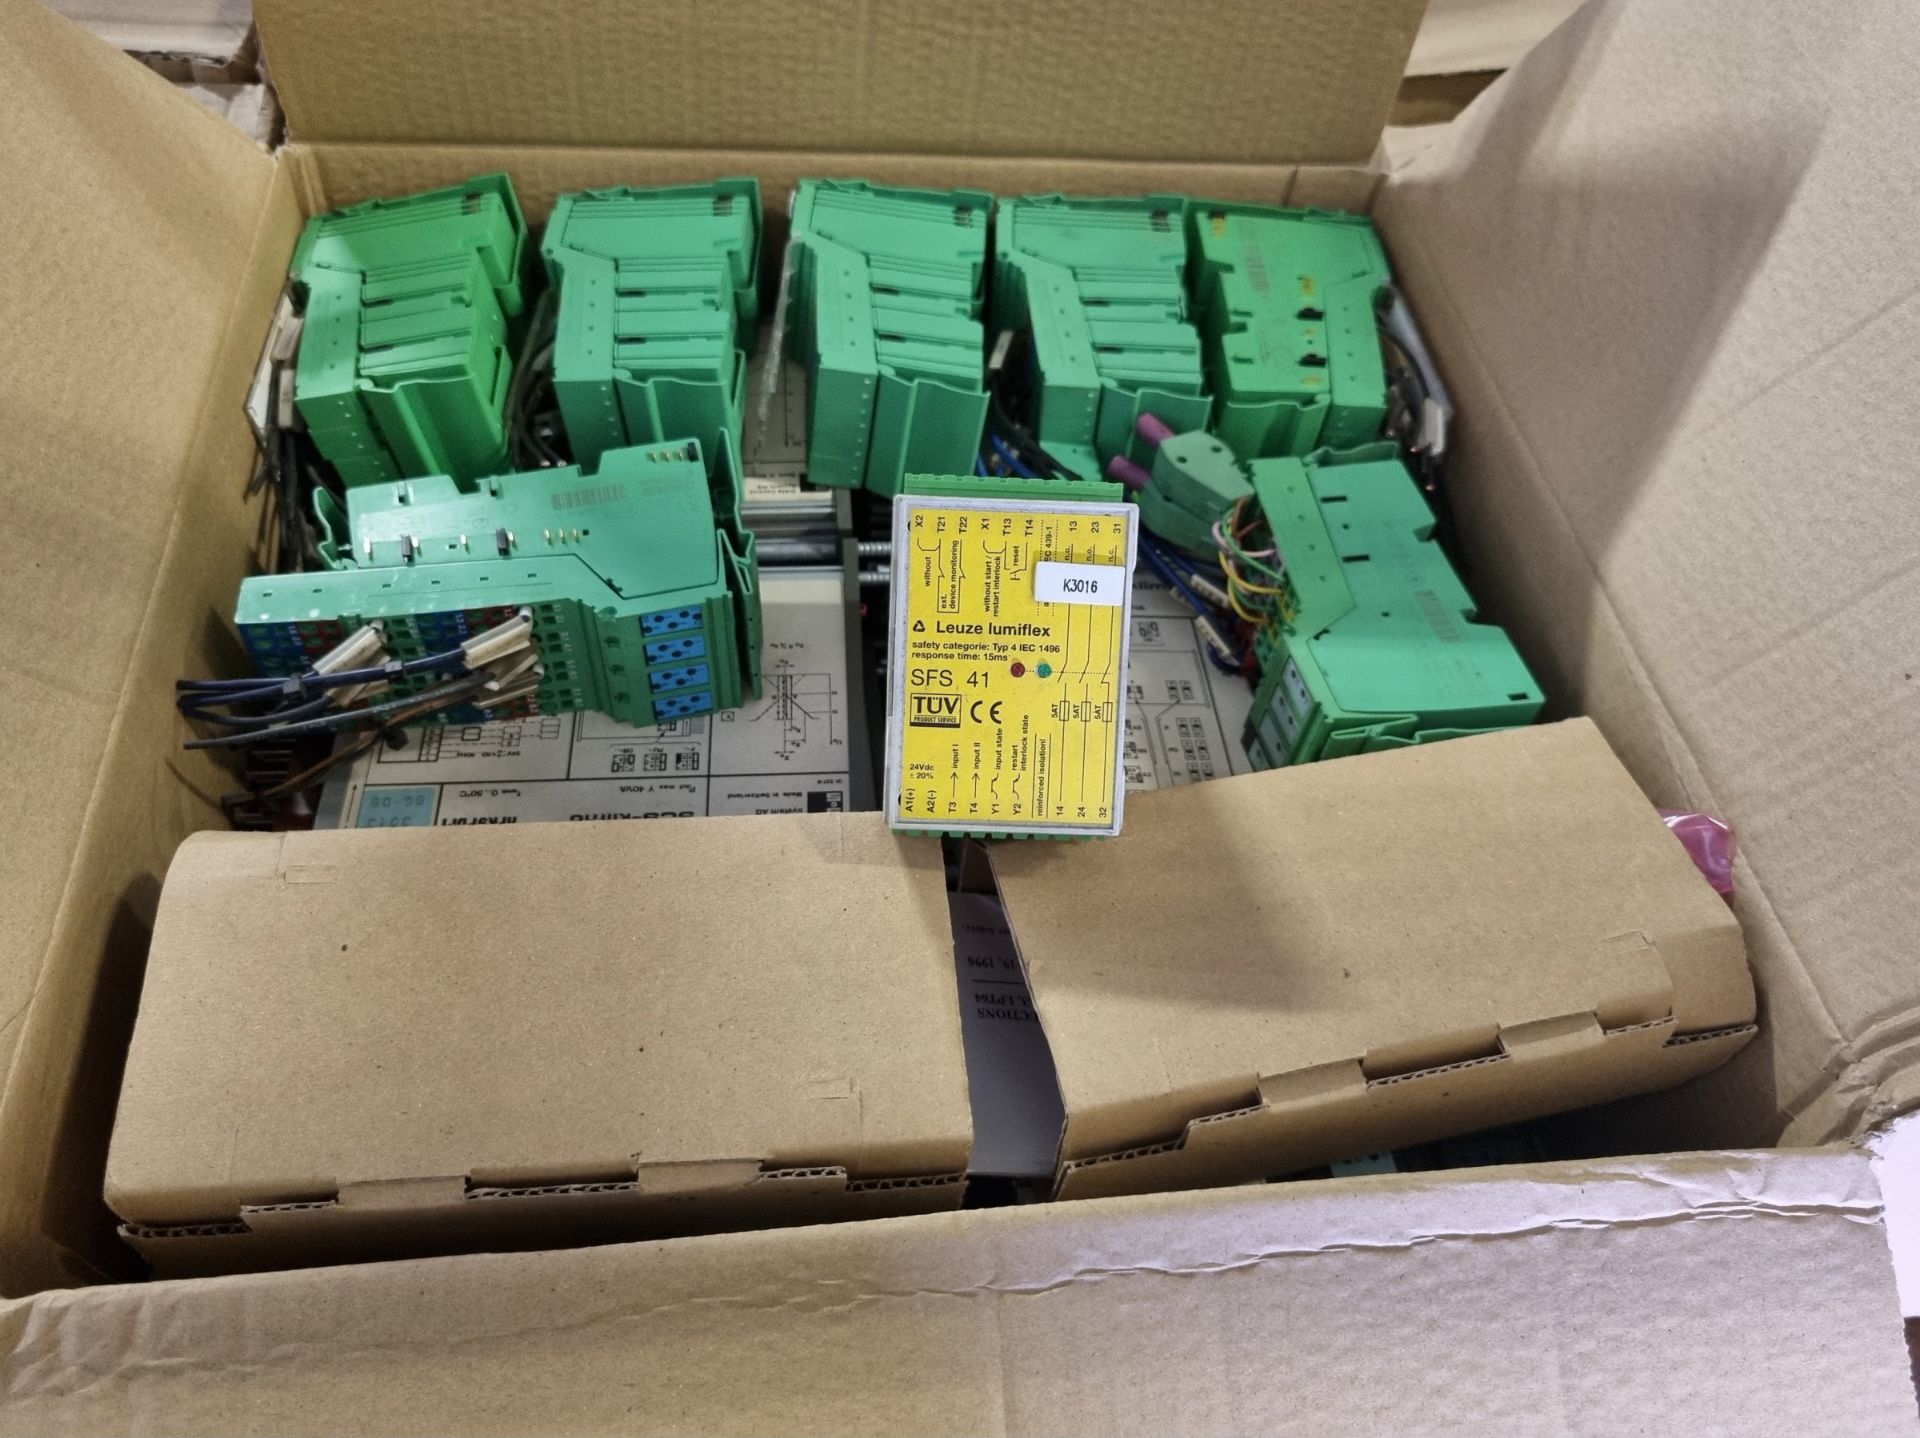 6x boxes of electrical spares - junction boxes - mixed sized switches - circuit boards